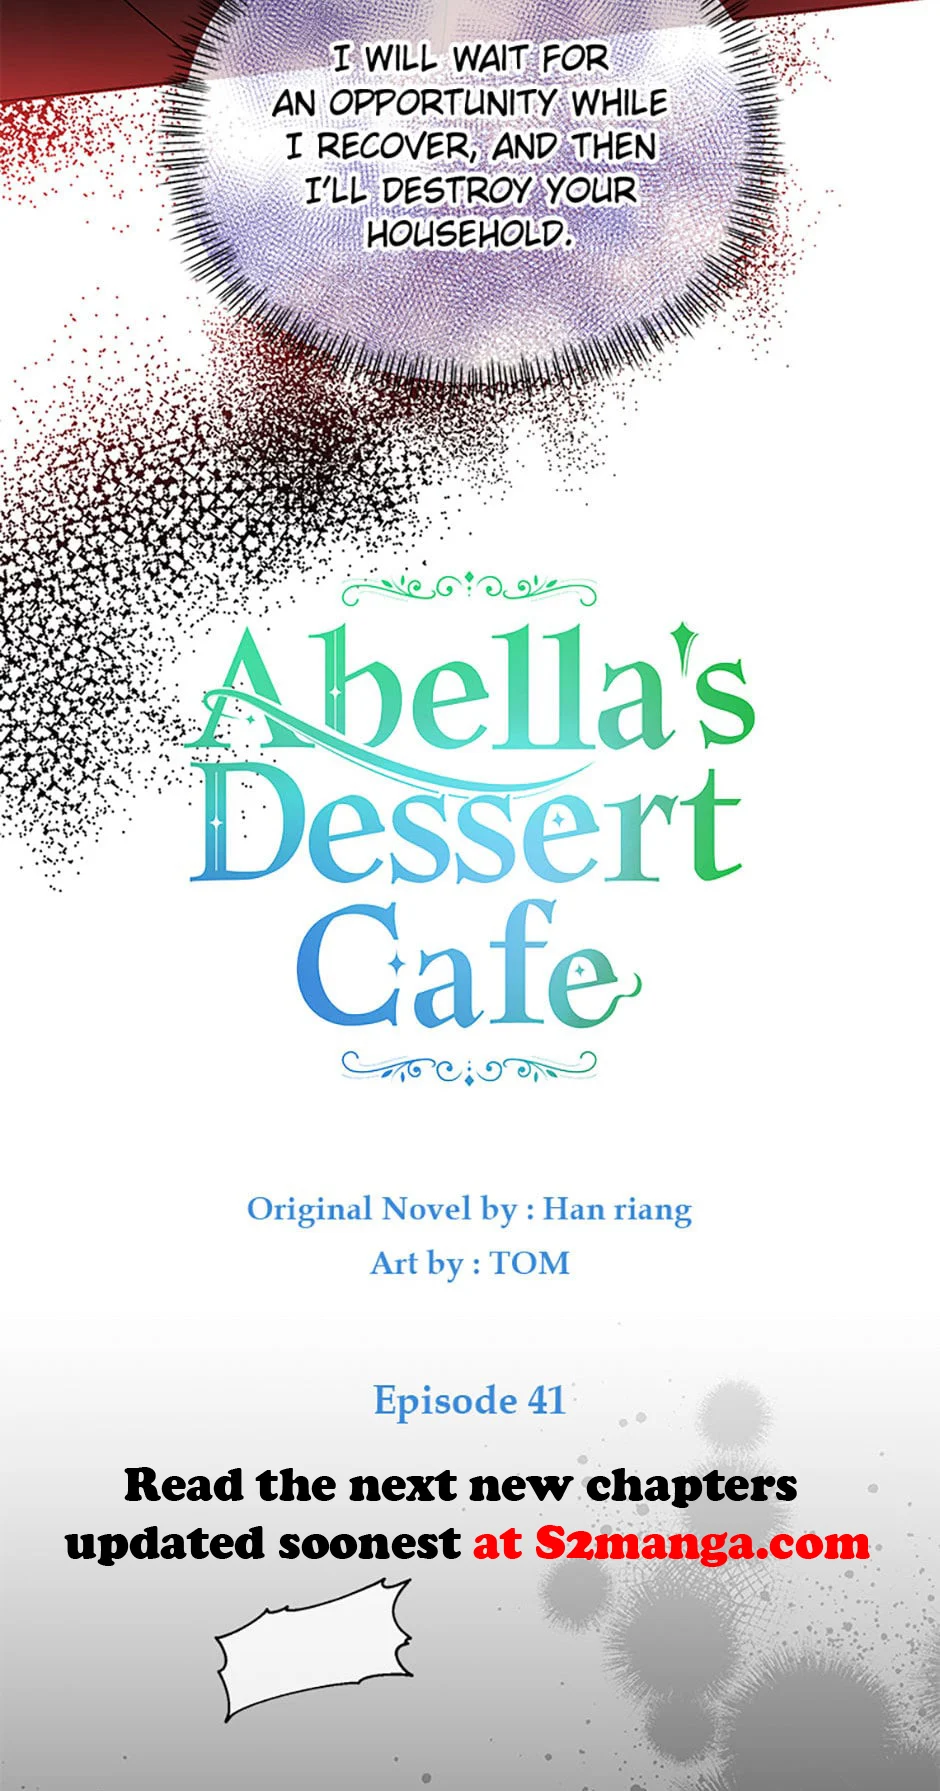 She came back and opened a dessert shop chapter 41